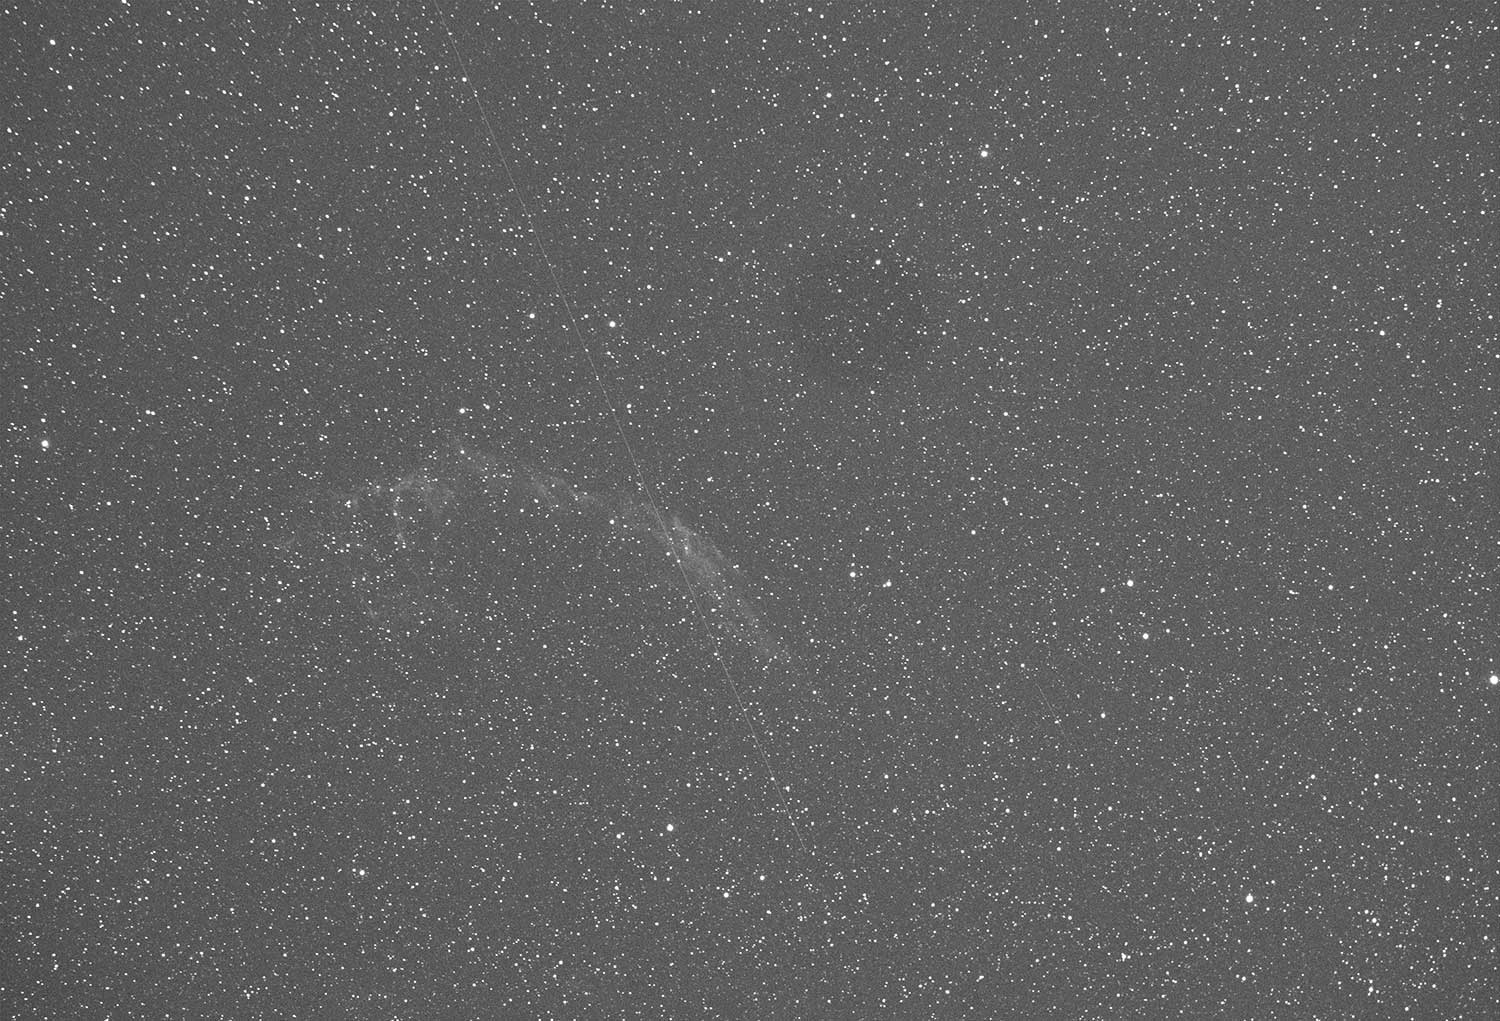 single 60 second exposure of Veil nebula before debayer with ASI 294 colour camera